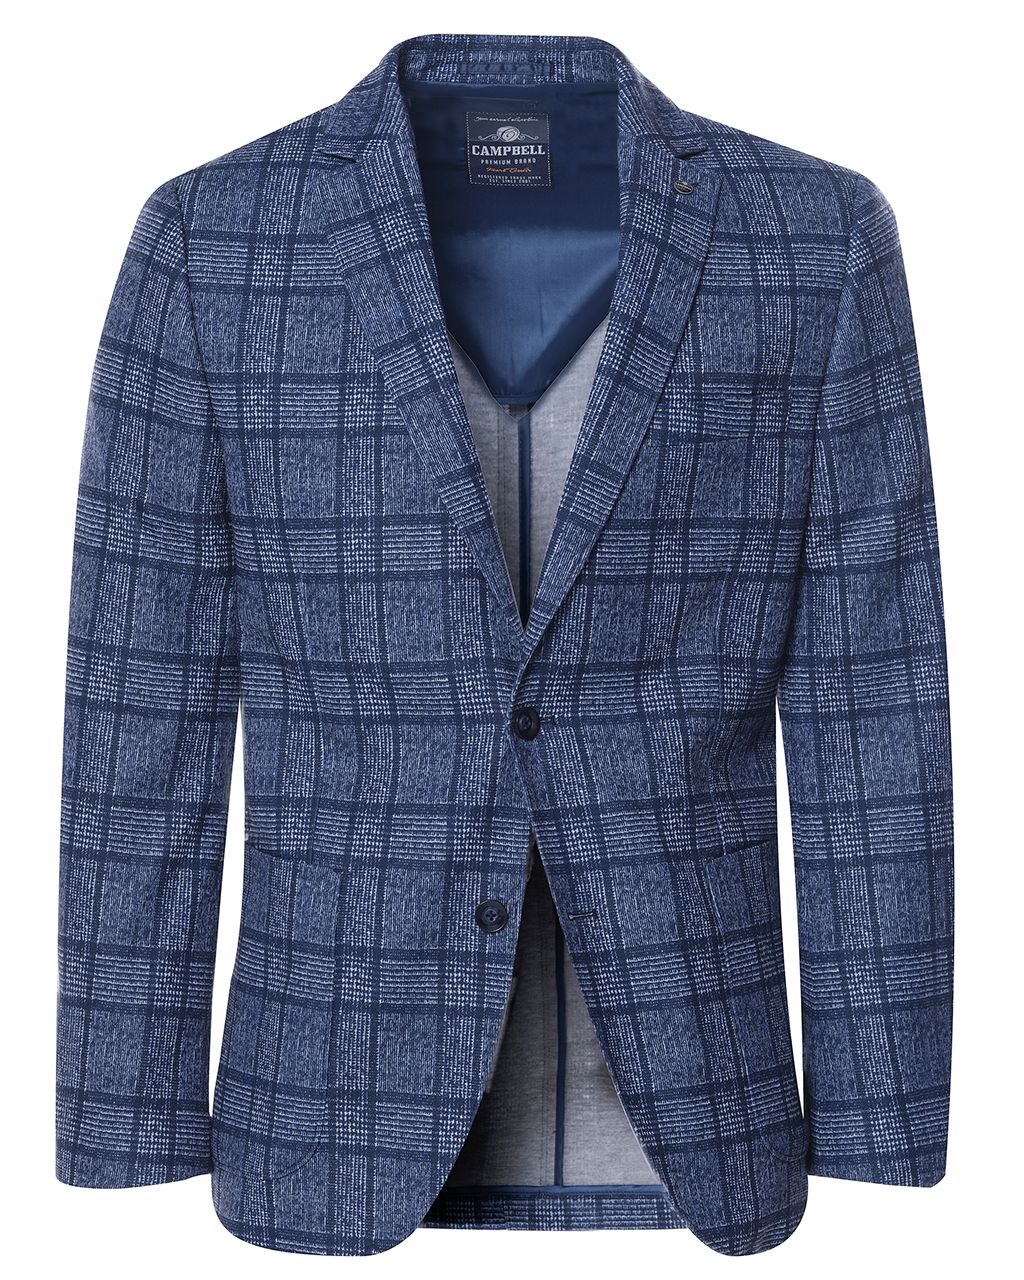 Campbell Classic Blazer Donkerblauw grote ruit 073066-003-48